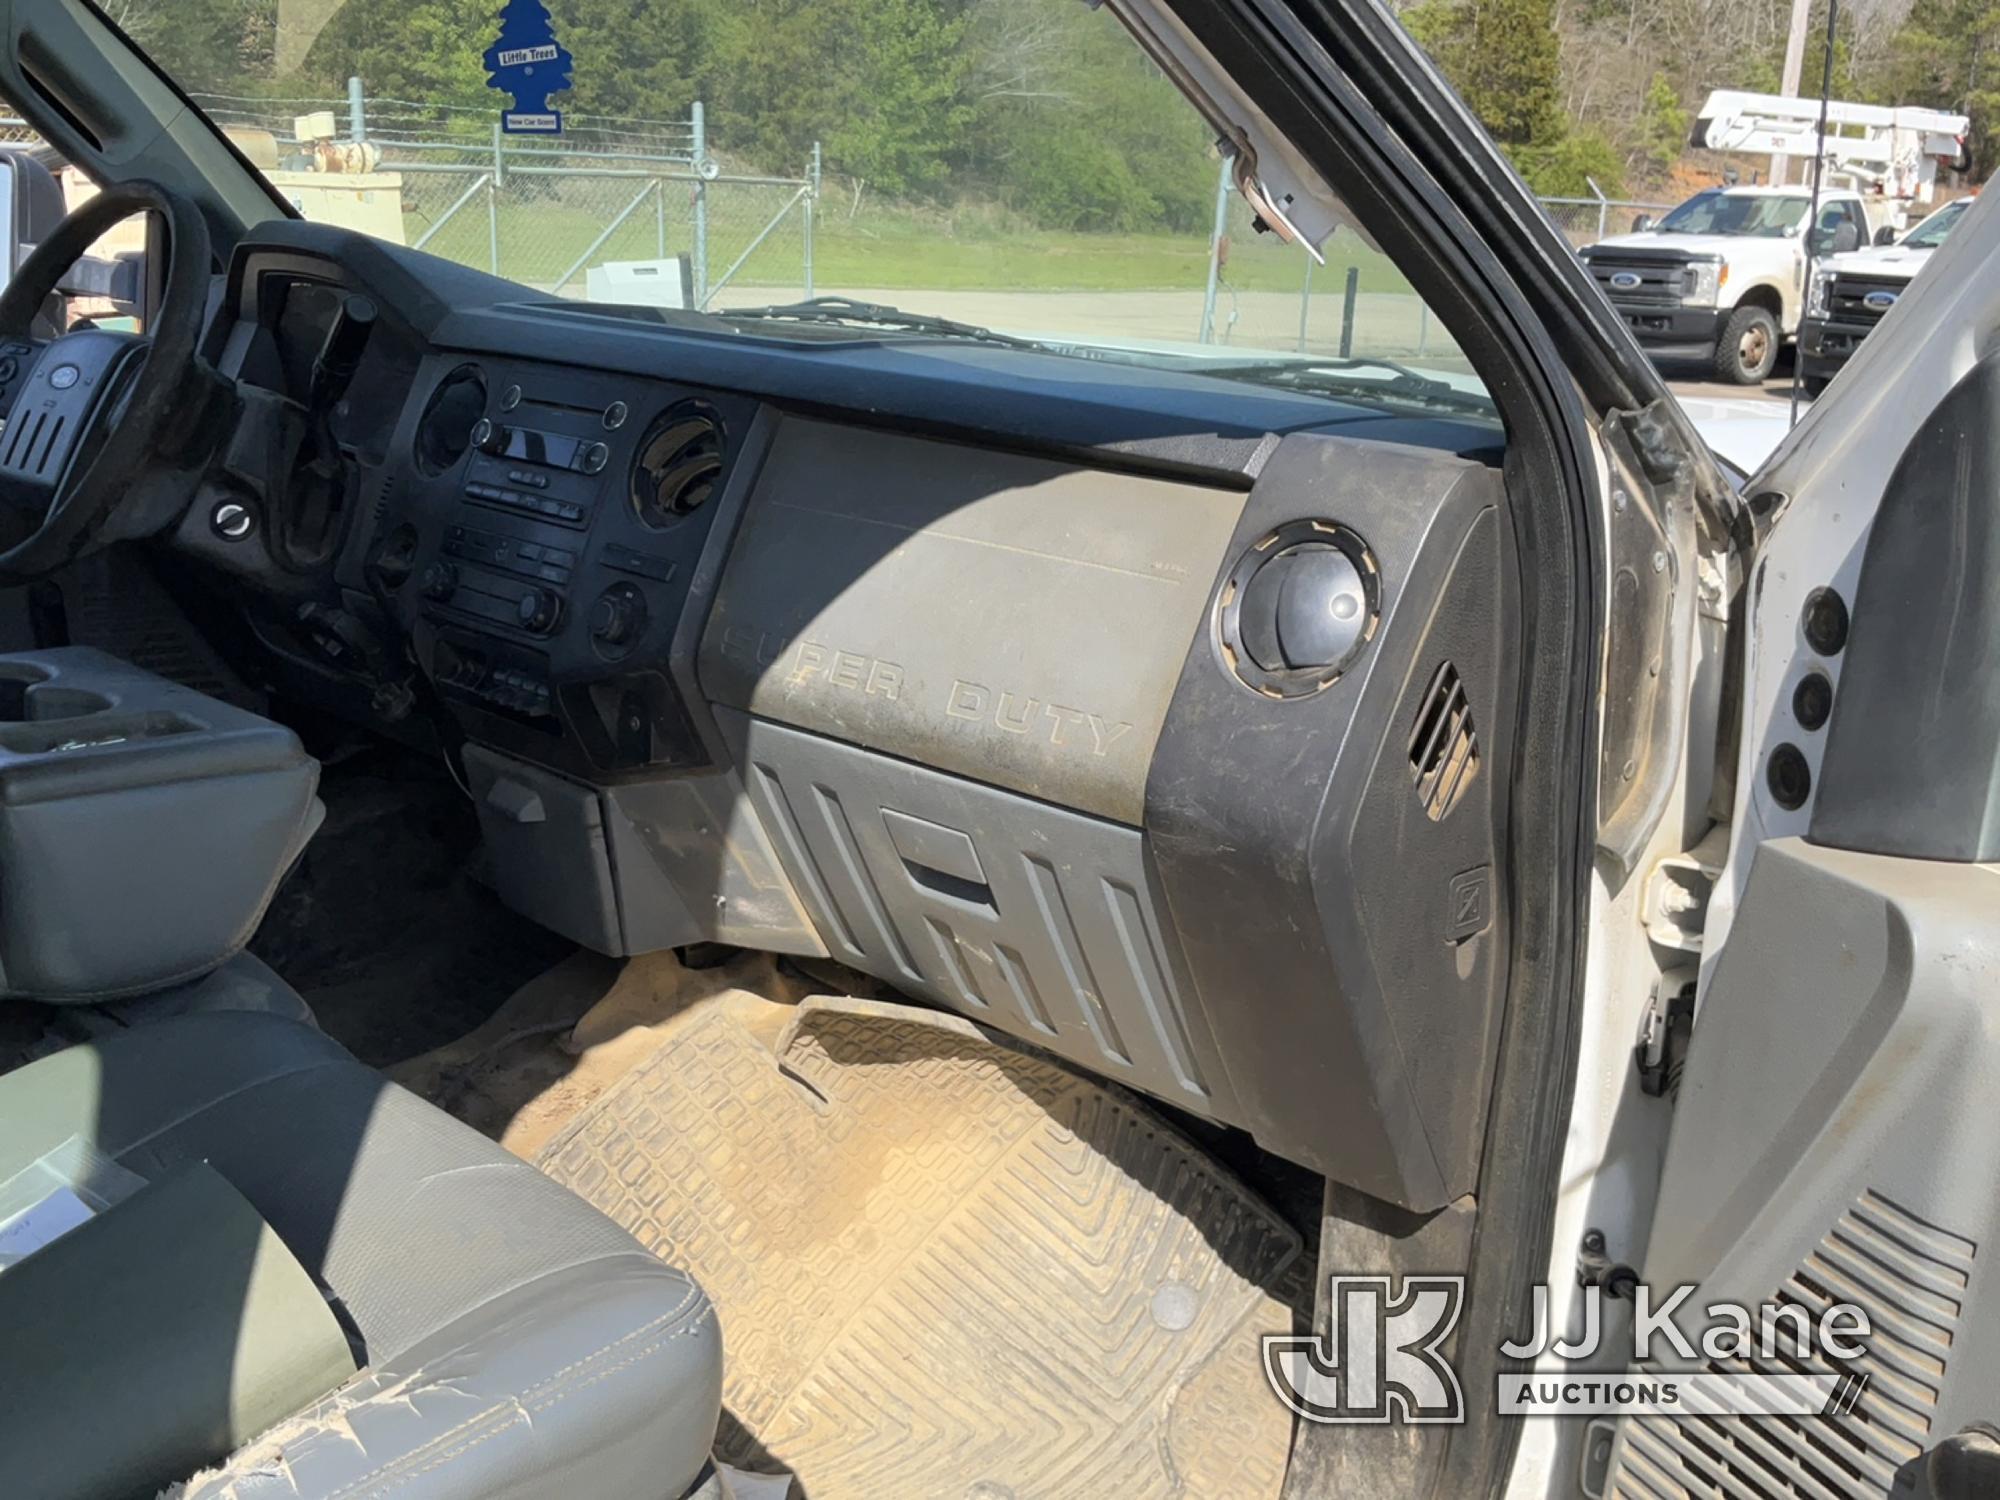 (Conway, AR) 2011 Ford F-450 SD Crew-Cab Service Truck Runs & Moves) (Jump To Start, Idles Rough, Re